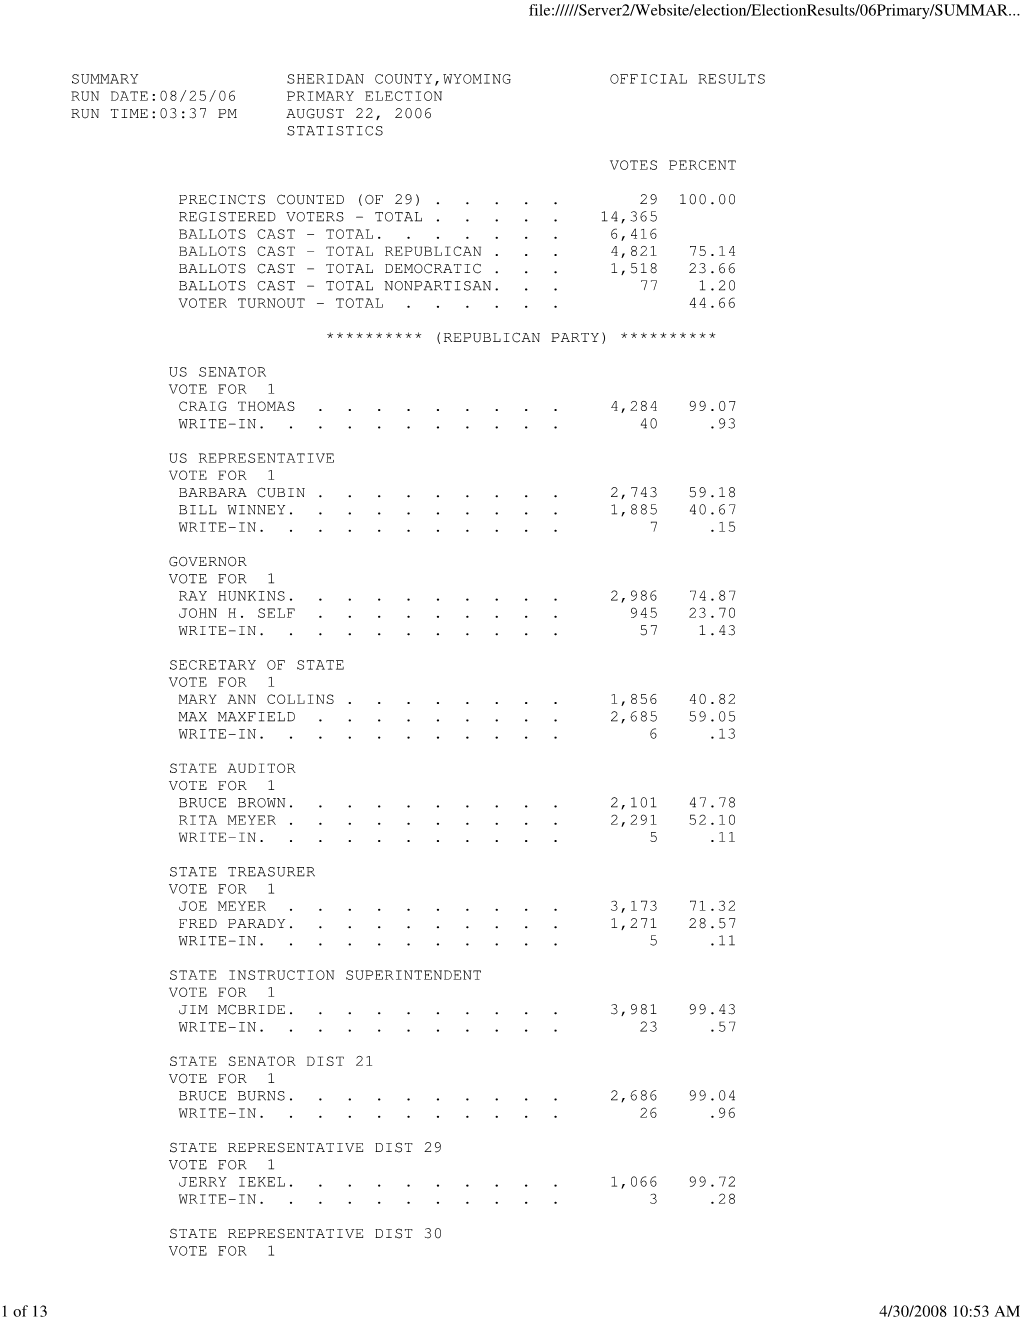 2006 Primary Election Results